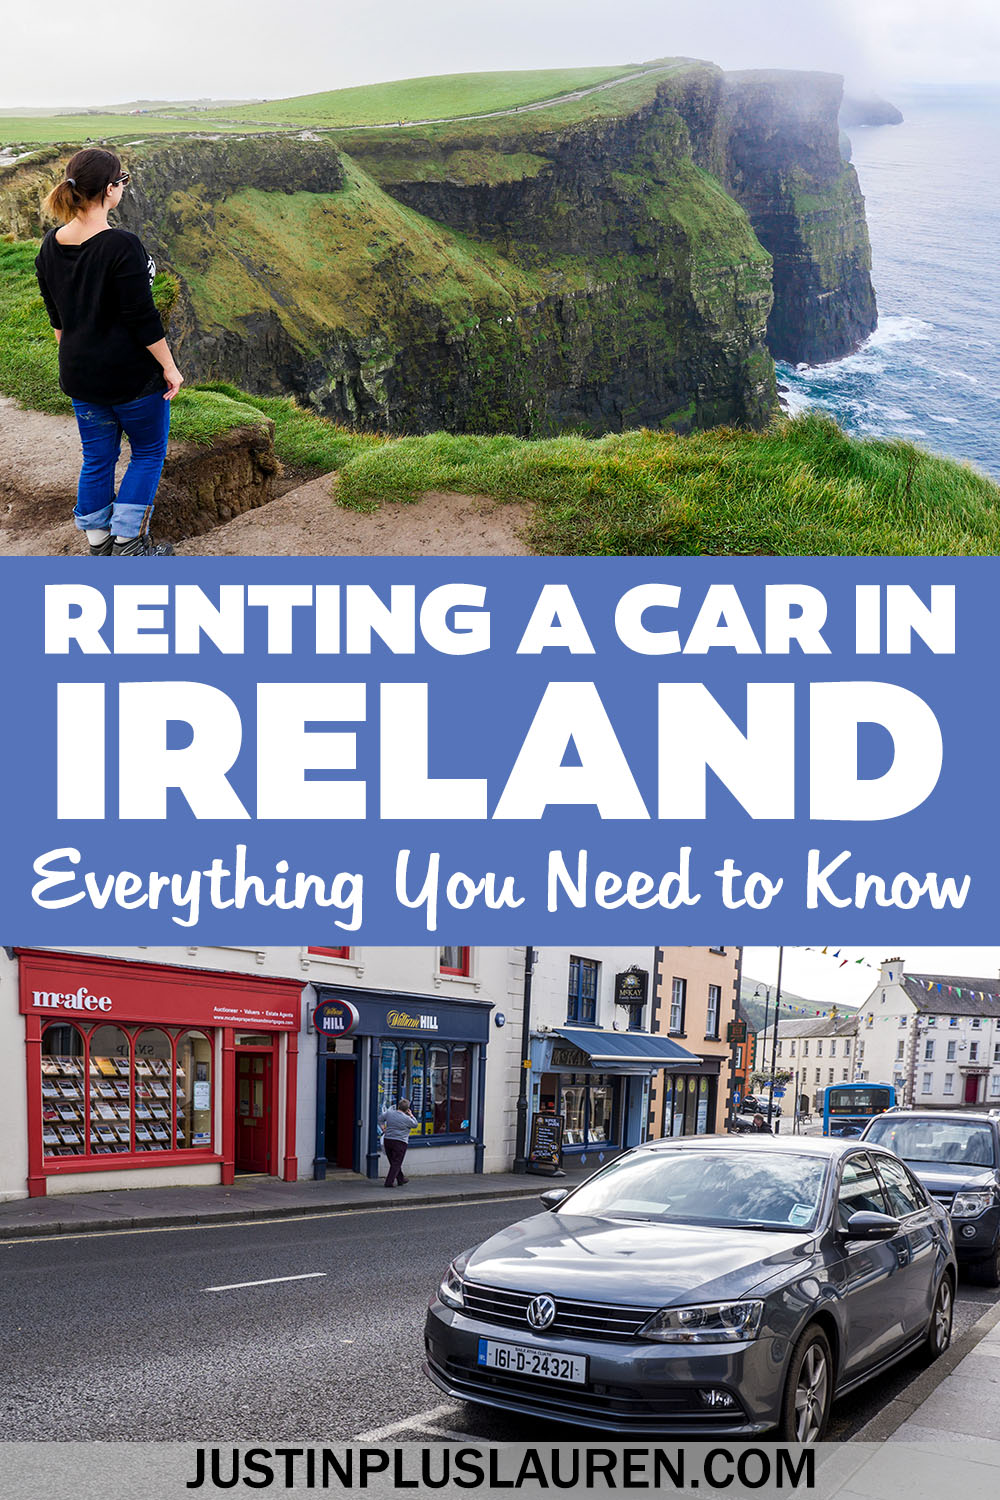 Renting a car in Ireland is the best way to see the country. Travel to Ireland and Northern Ireland at your own pace with a car rental.